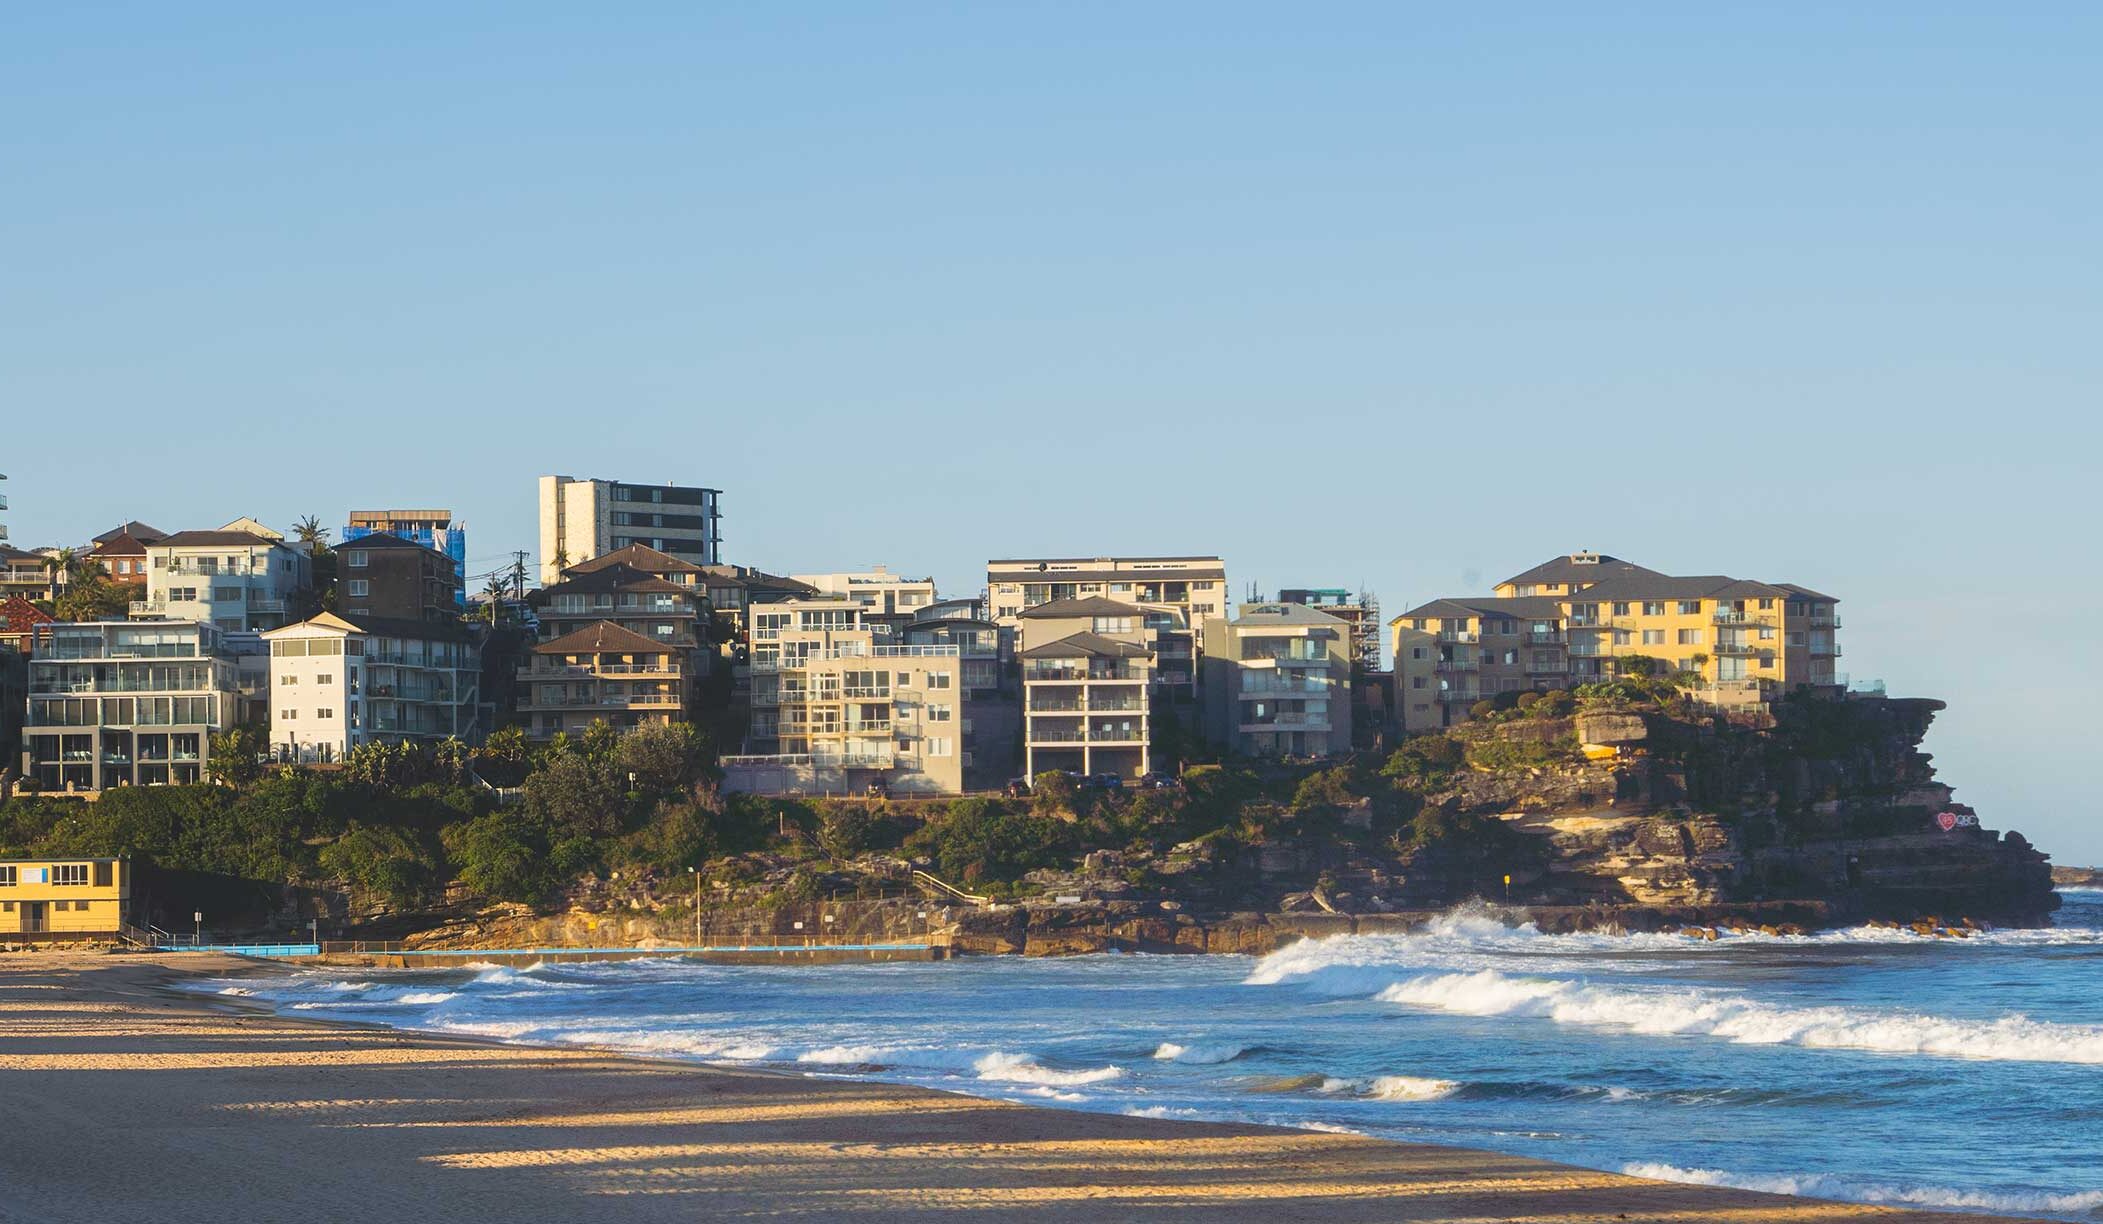 Modern luxury apartments overlooking Manly Beach in Sydney with gentle waves, under a clear sky at golden hour.